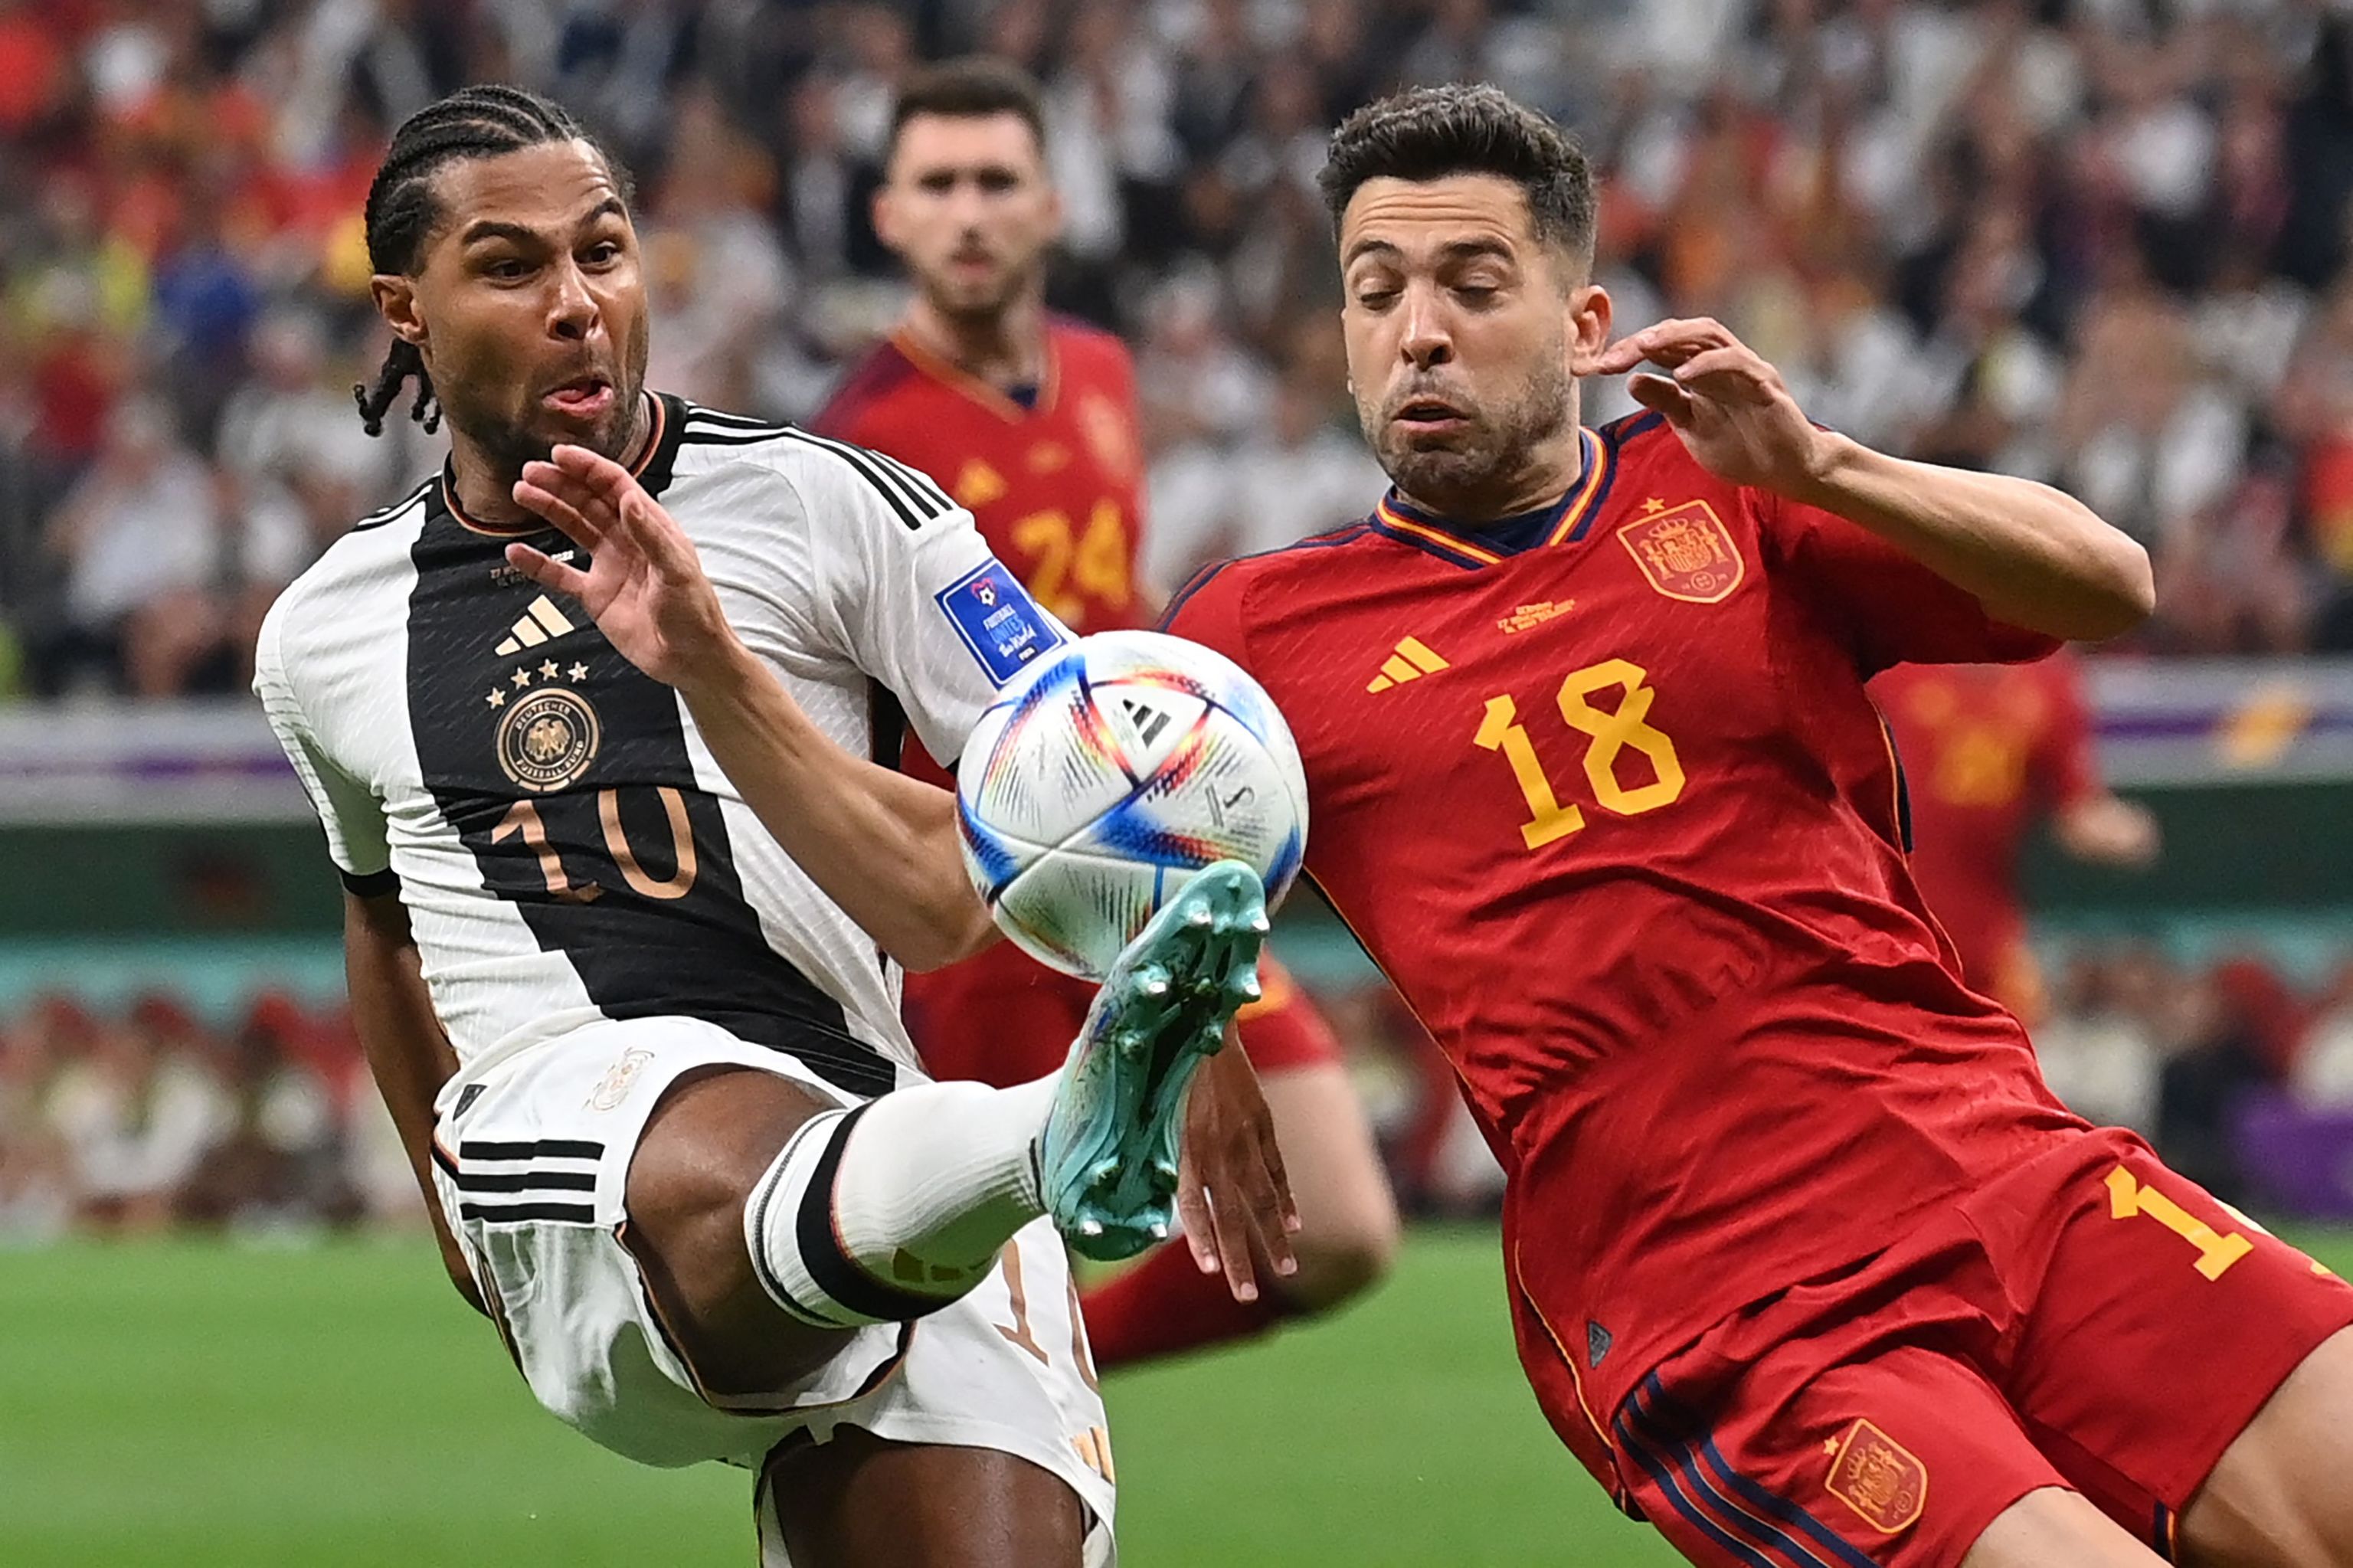 Germany's forward #10 Serge Gnabry vies with  lt;HIT gt;Spain lt;/HIT gt;'s defender #18 Jordi Alba during the Qatar 2022 World Cup Group E football match between  lt;HIT gt;Spain lt;/HIT gt; and Germany at the Al-Bayt Stadium in Al Khor, north of Doha on November 27, 2022. (Photo by Glyn KIRK / AFP)